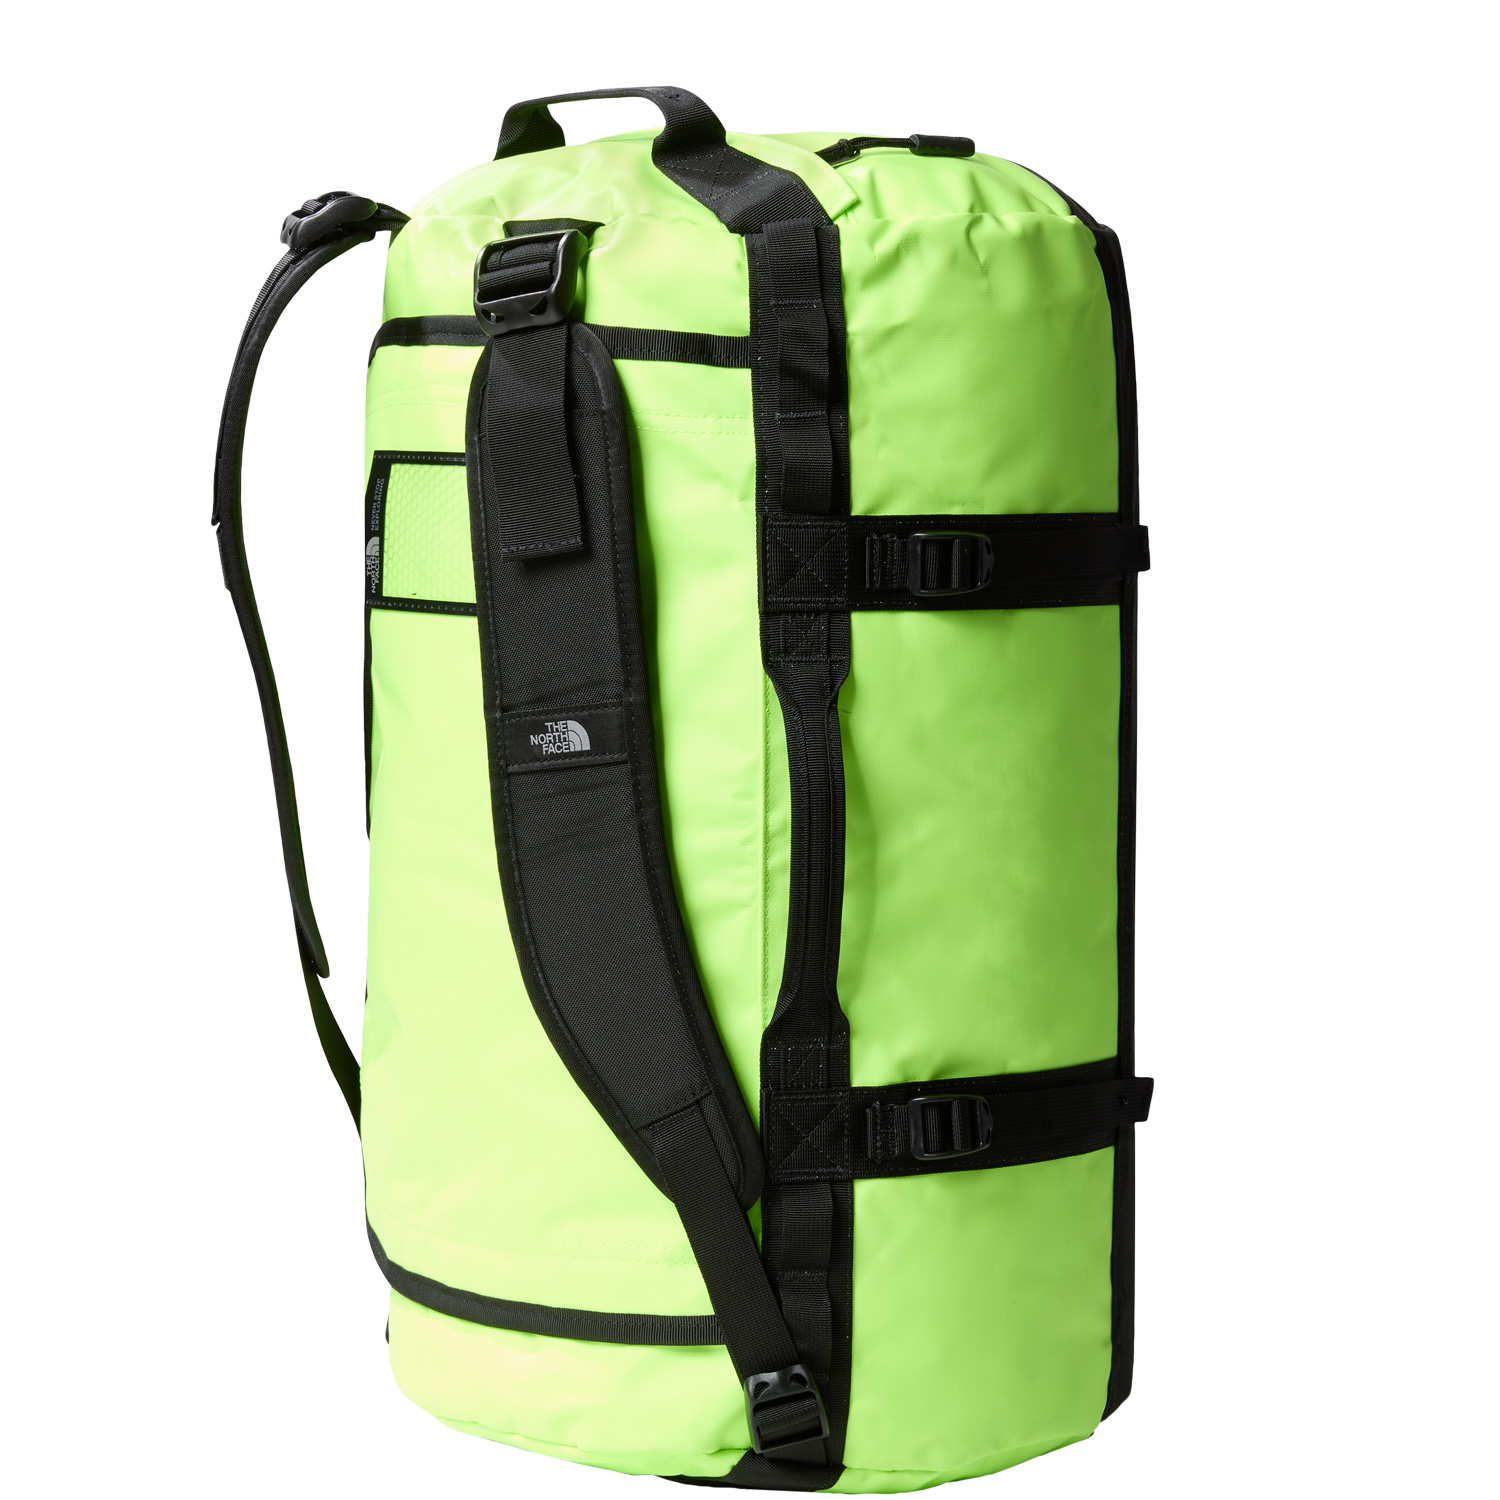 The North Face Reise/-Sporttasche Rucksack Base Camp Duffel S Safety Green-TNF Black